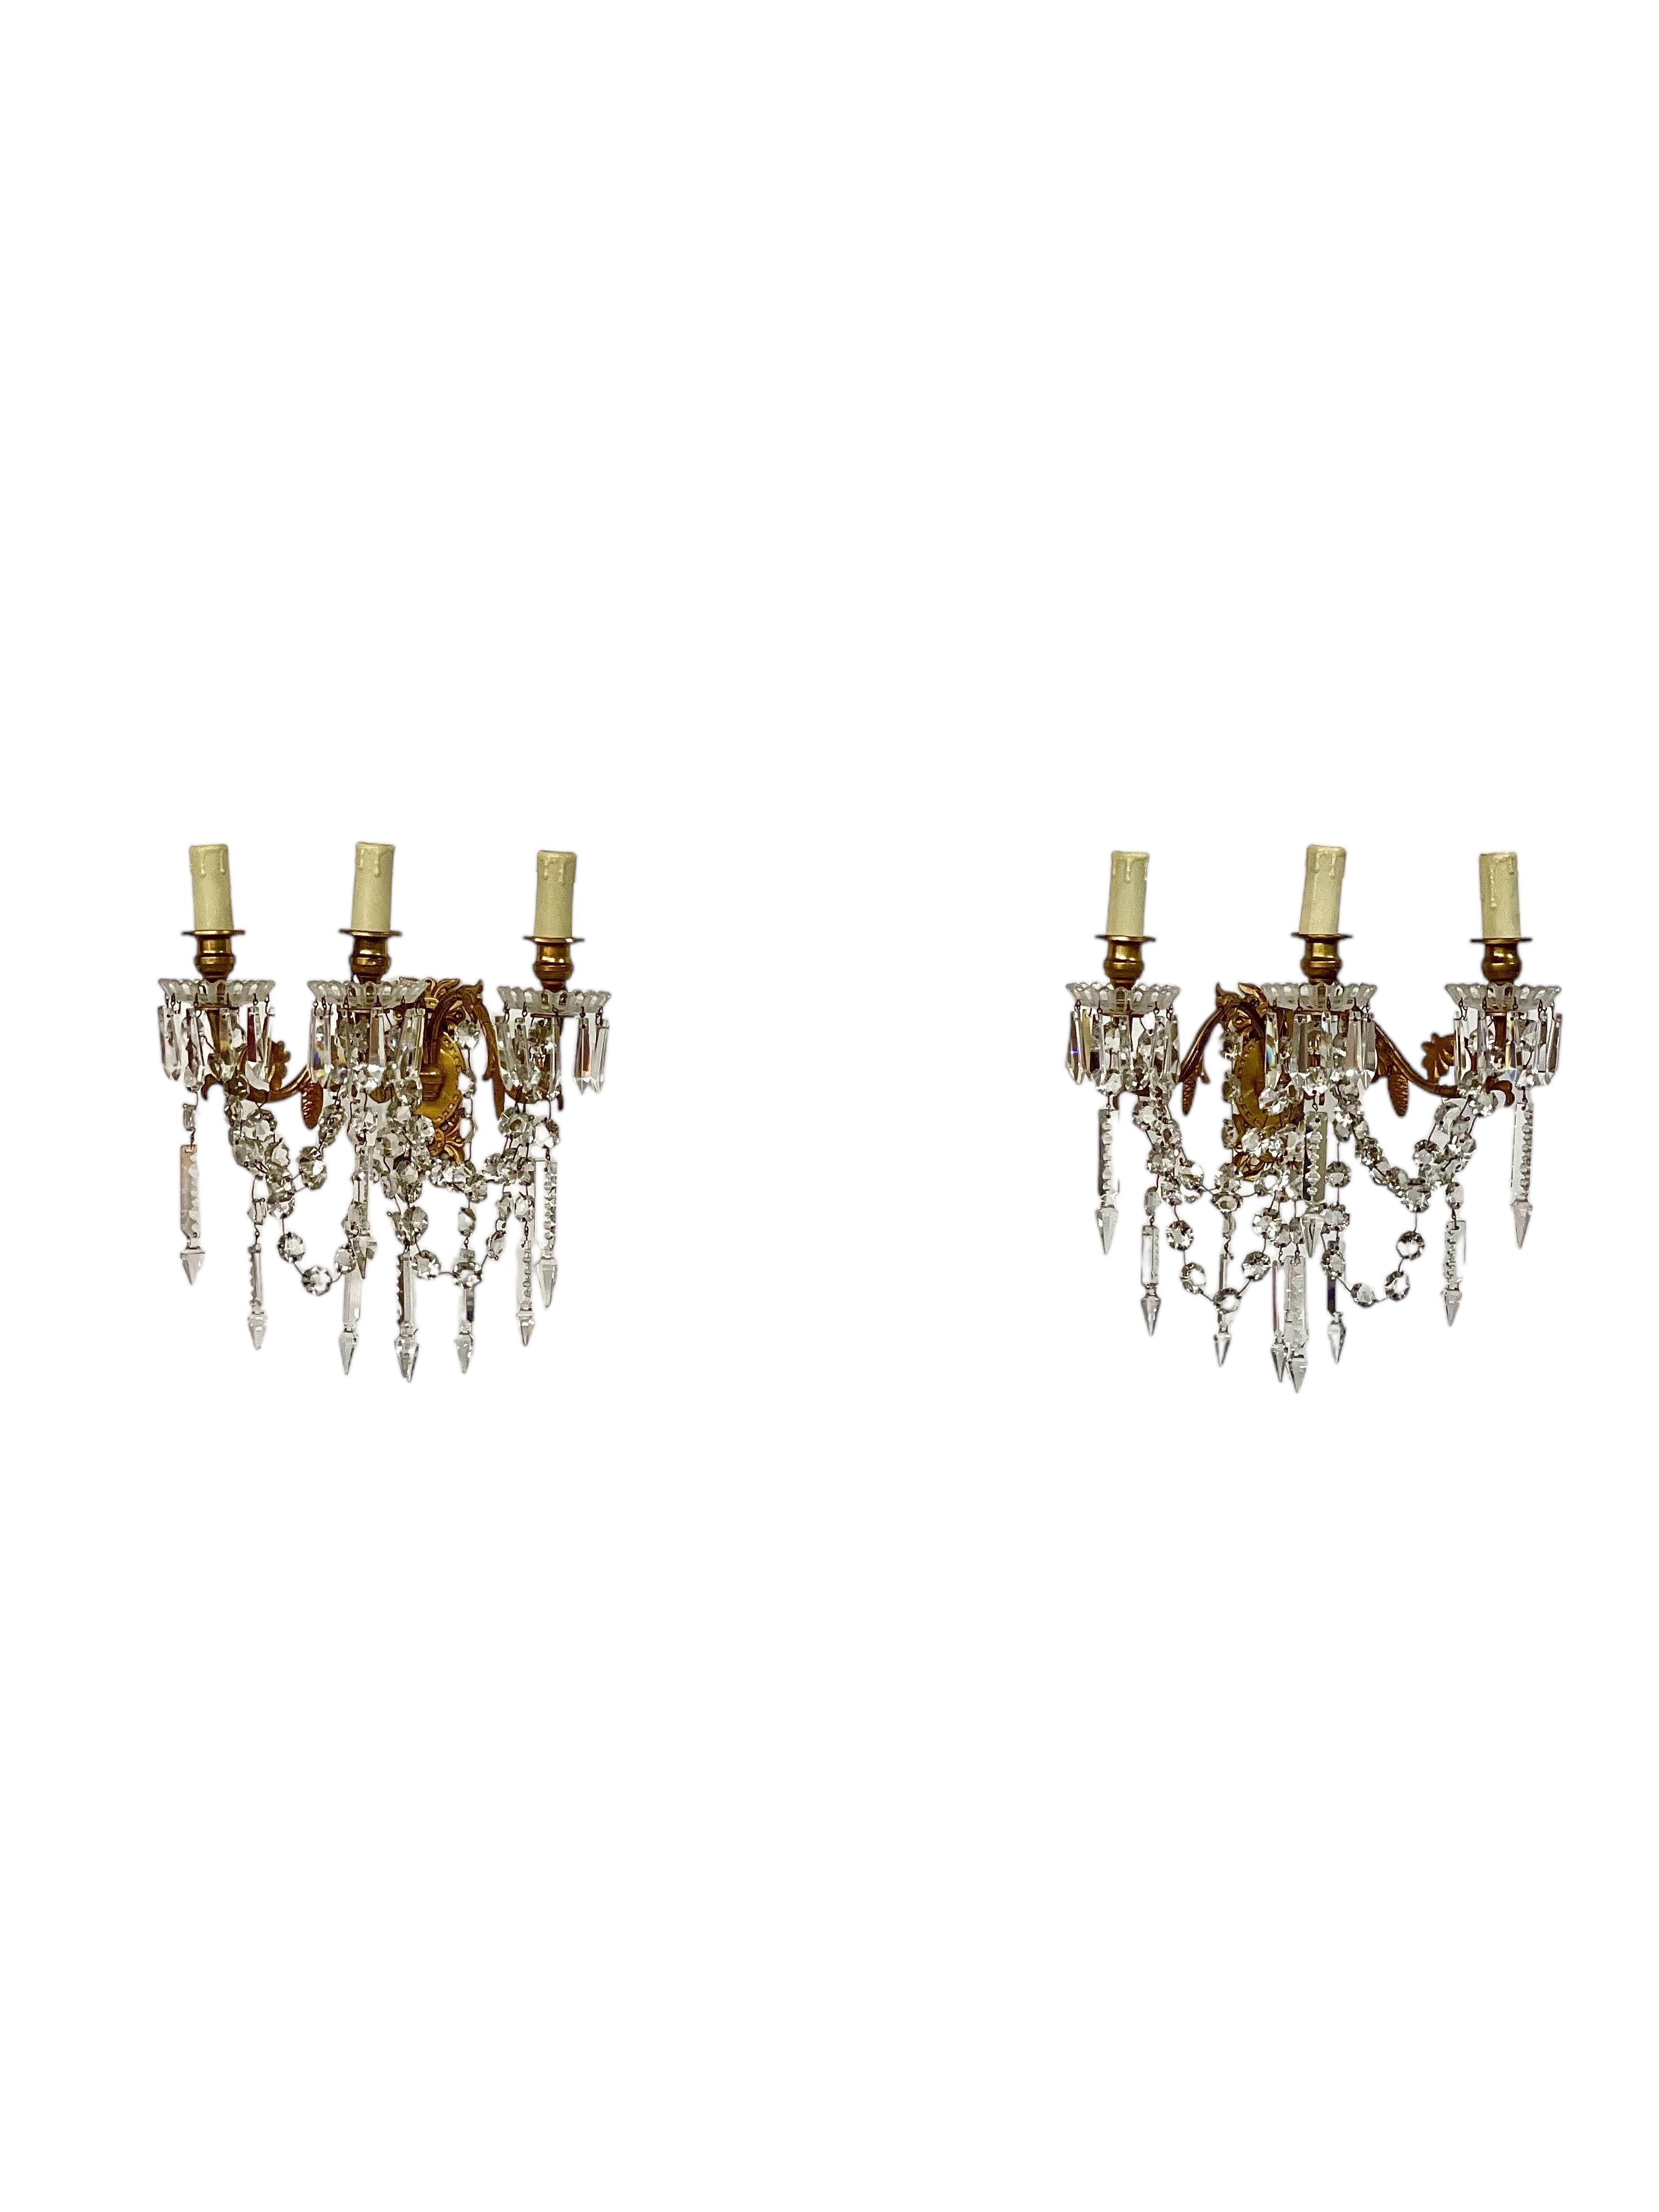 19th Century Pair of Baccarat Wall Sconces in Gilt Bronze and Crystal For Sale 3